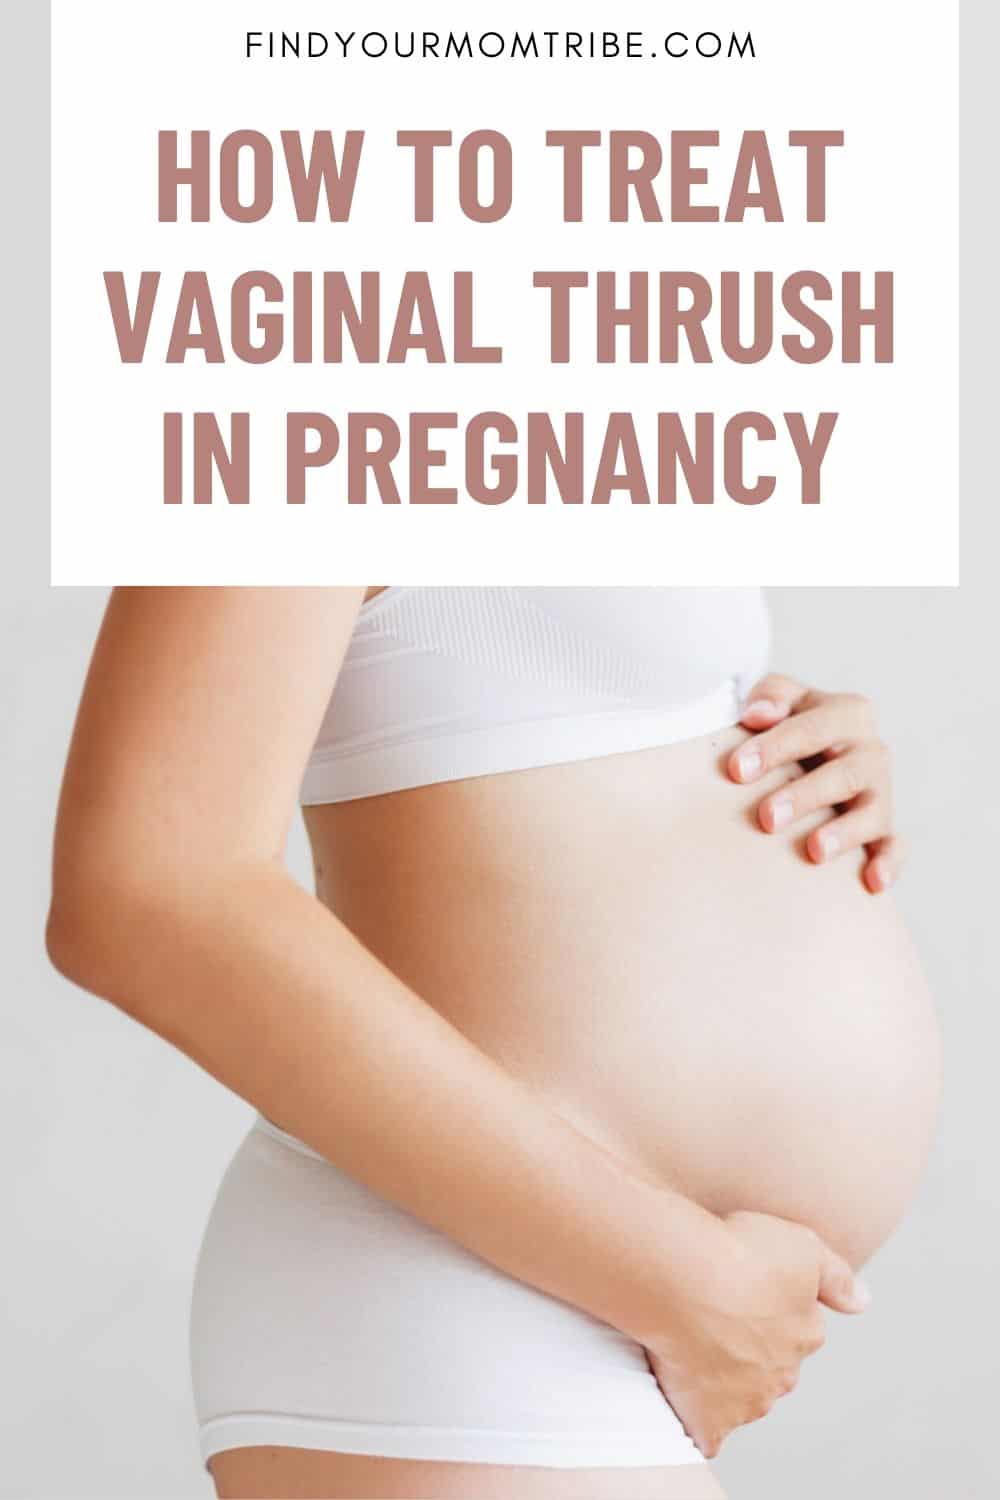 How To Treat Vaginal Thrush In Pregnancy pinterest